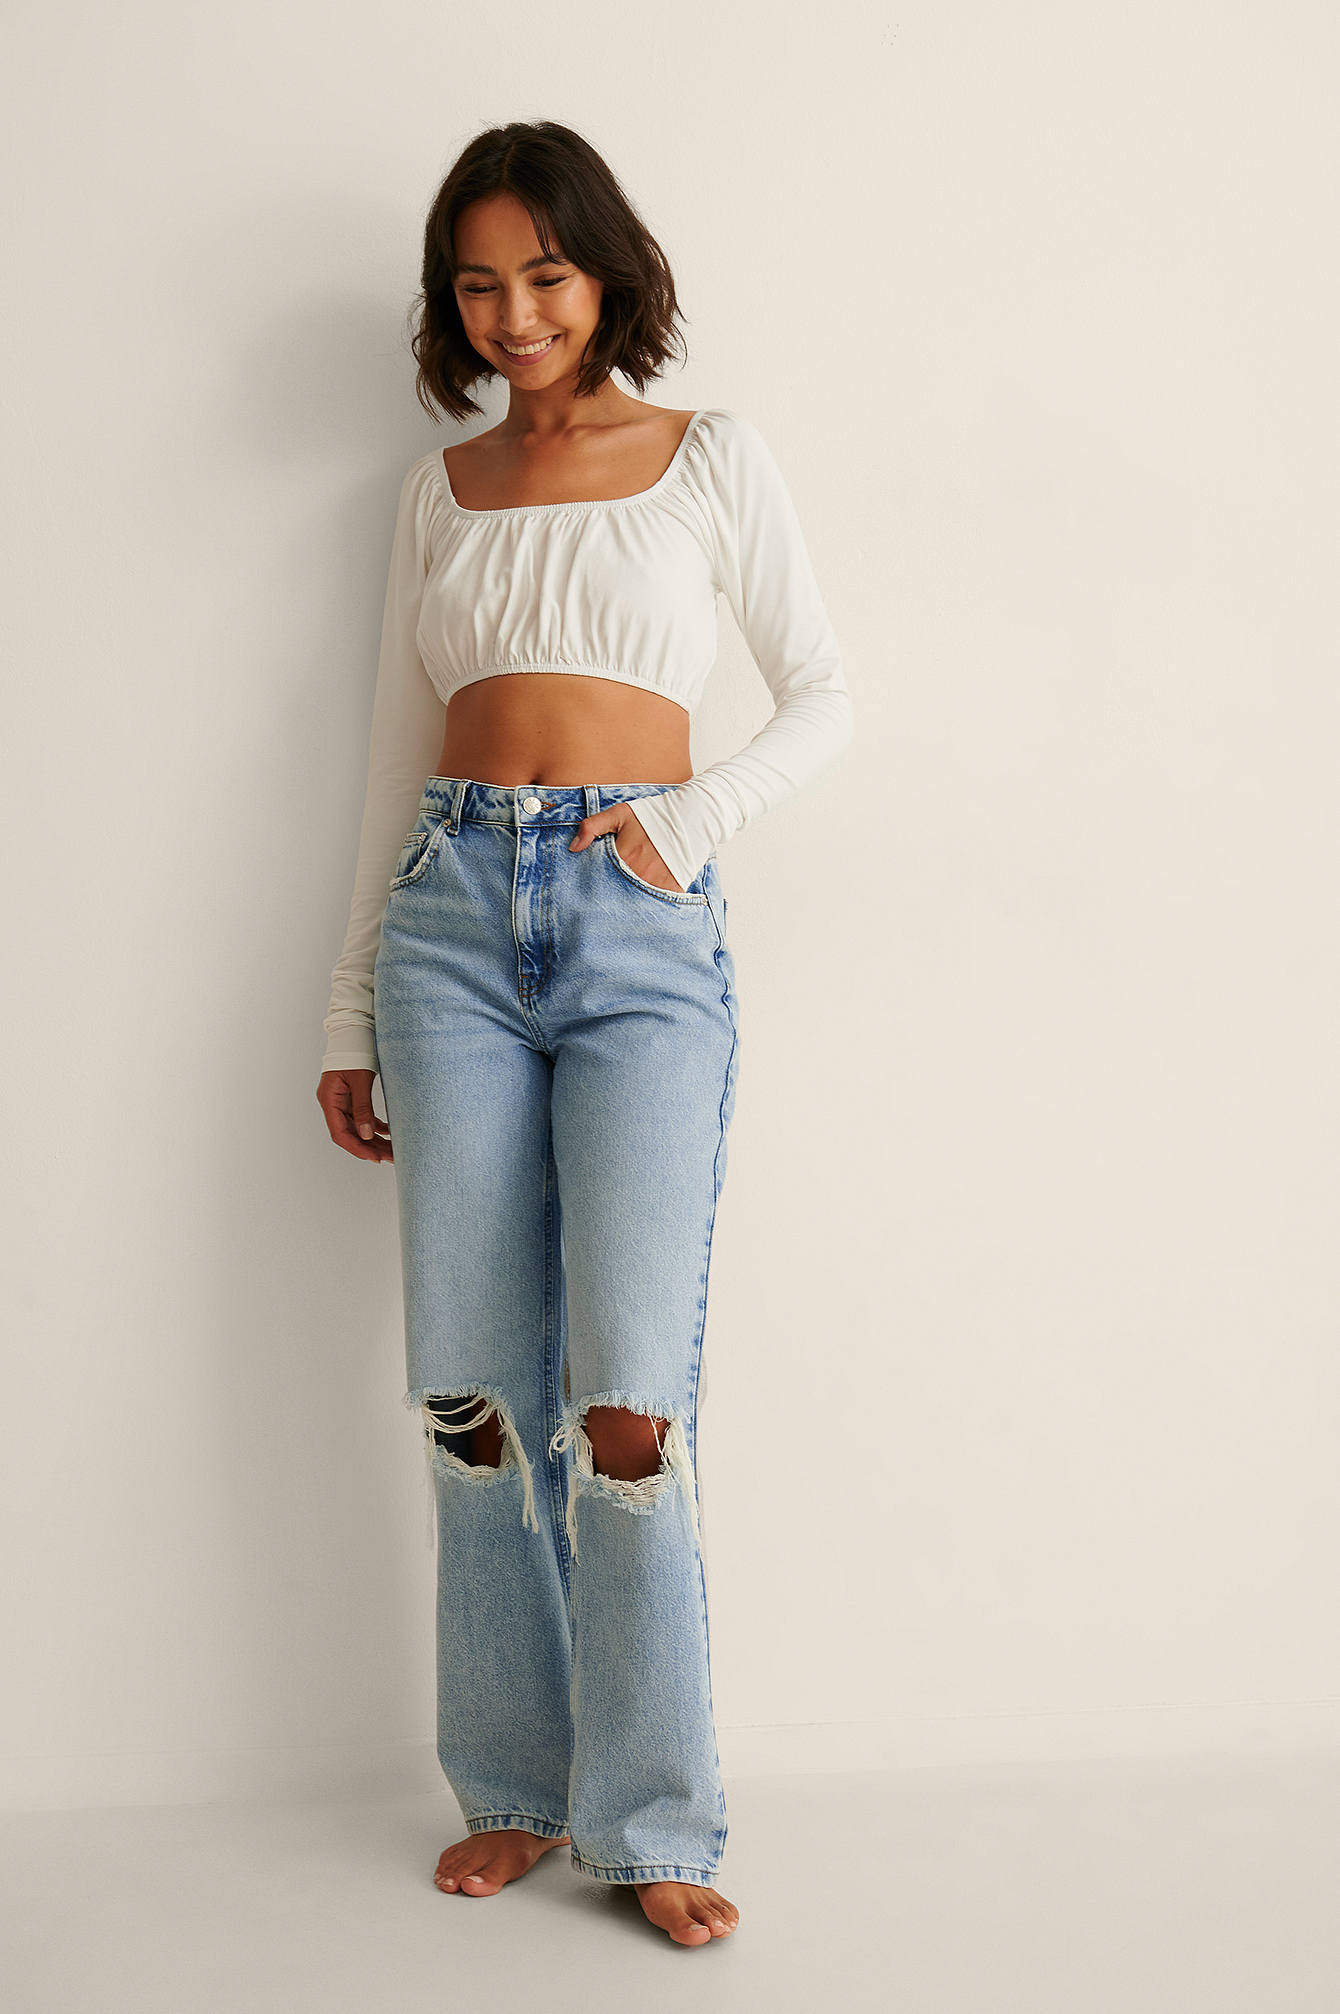 Elastic Neck Detail Crop Top Outfit